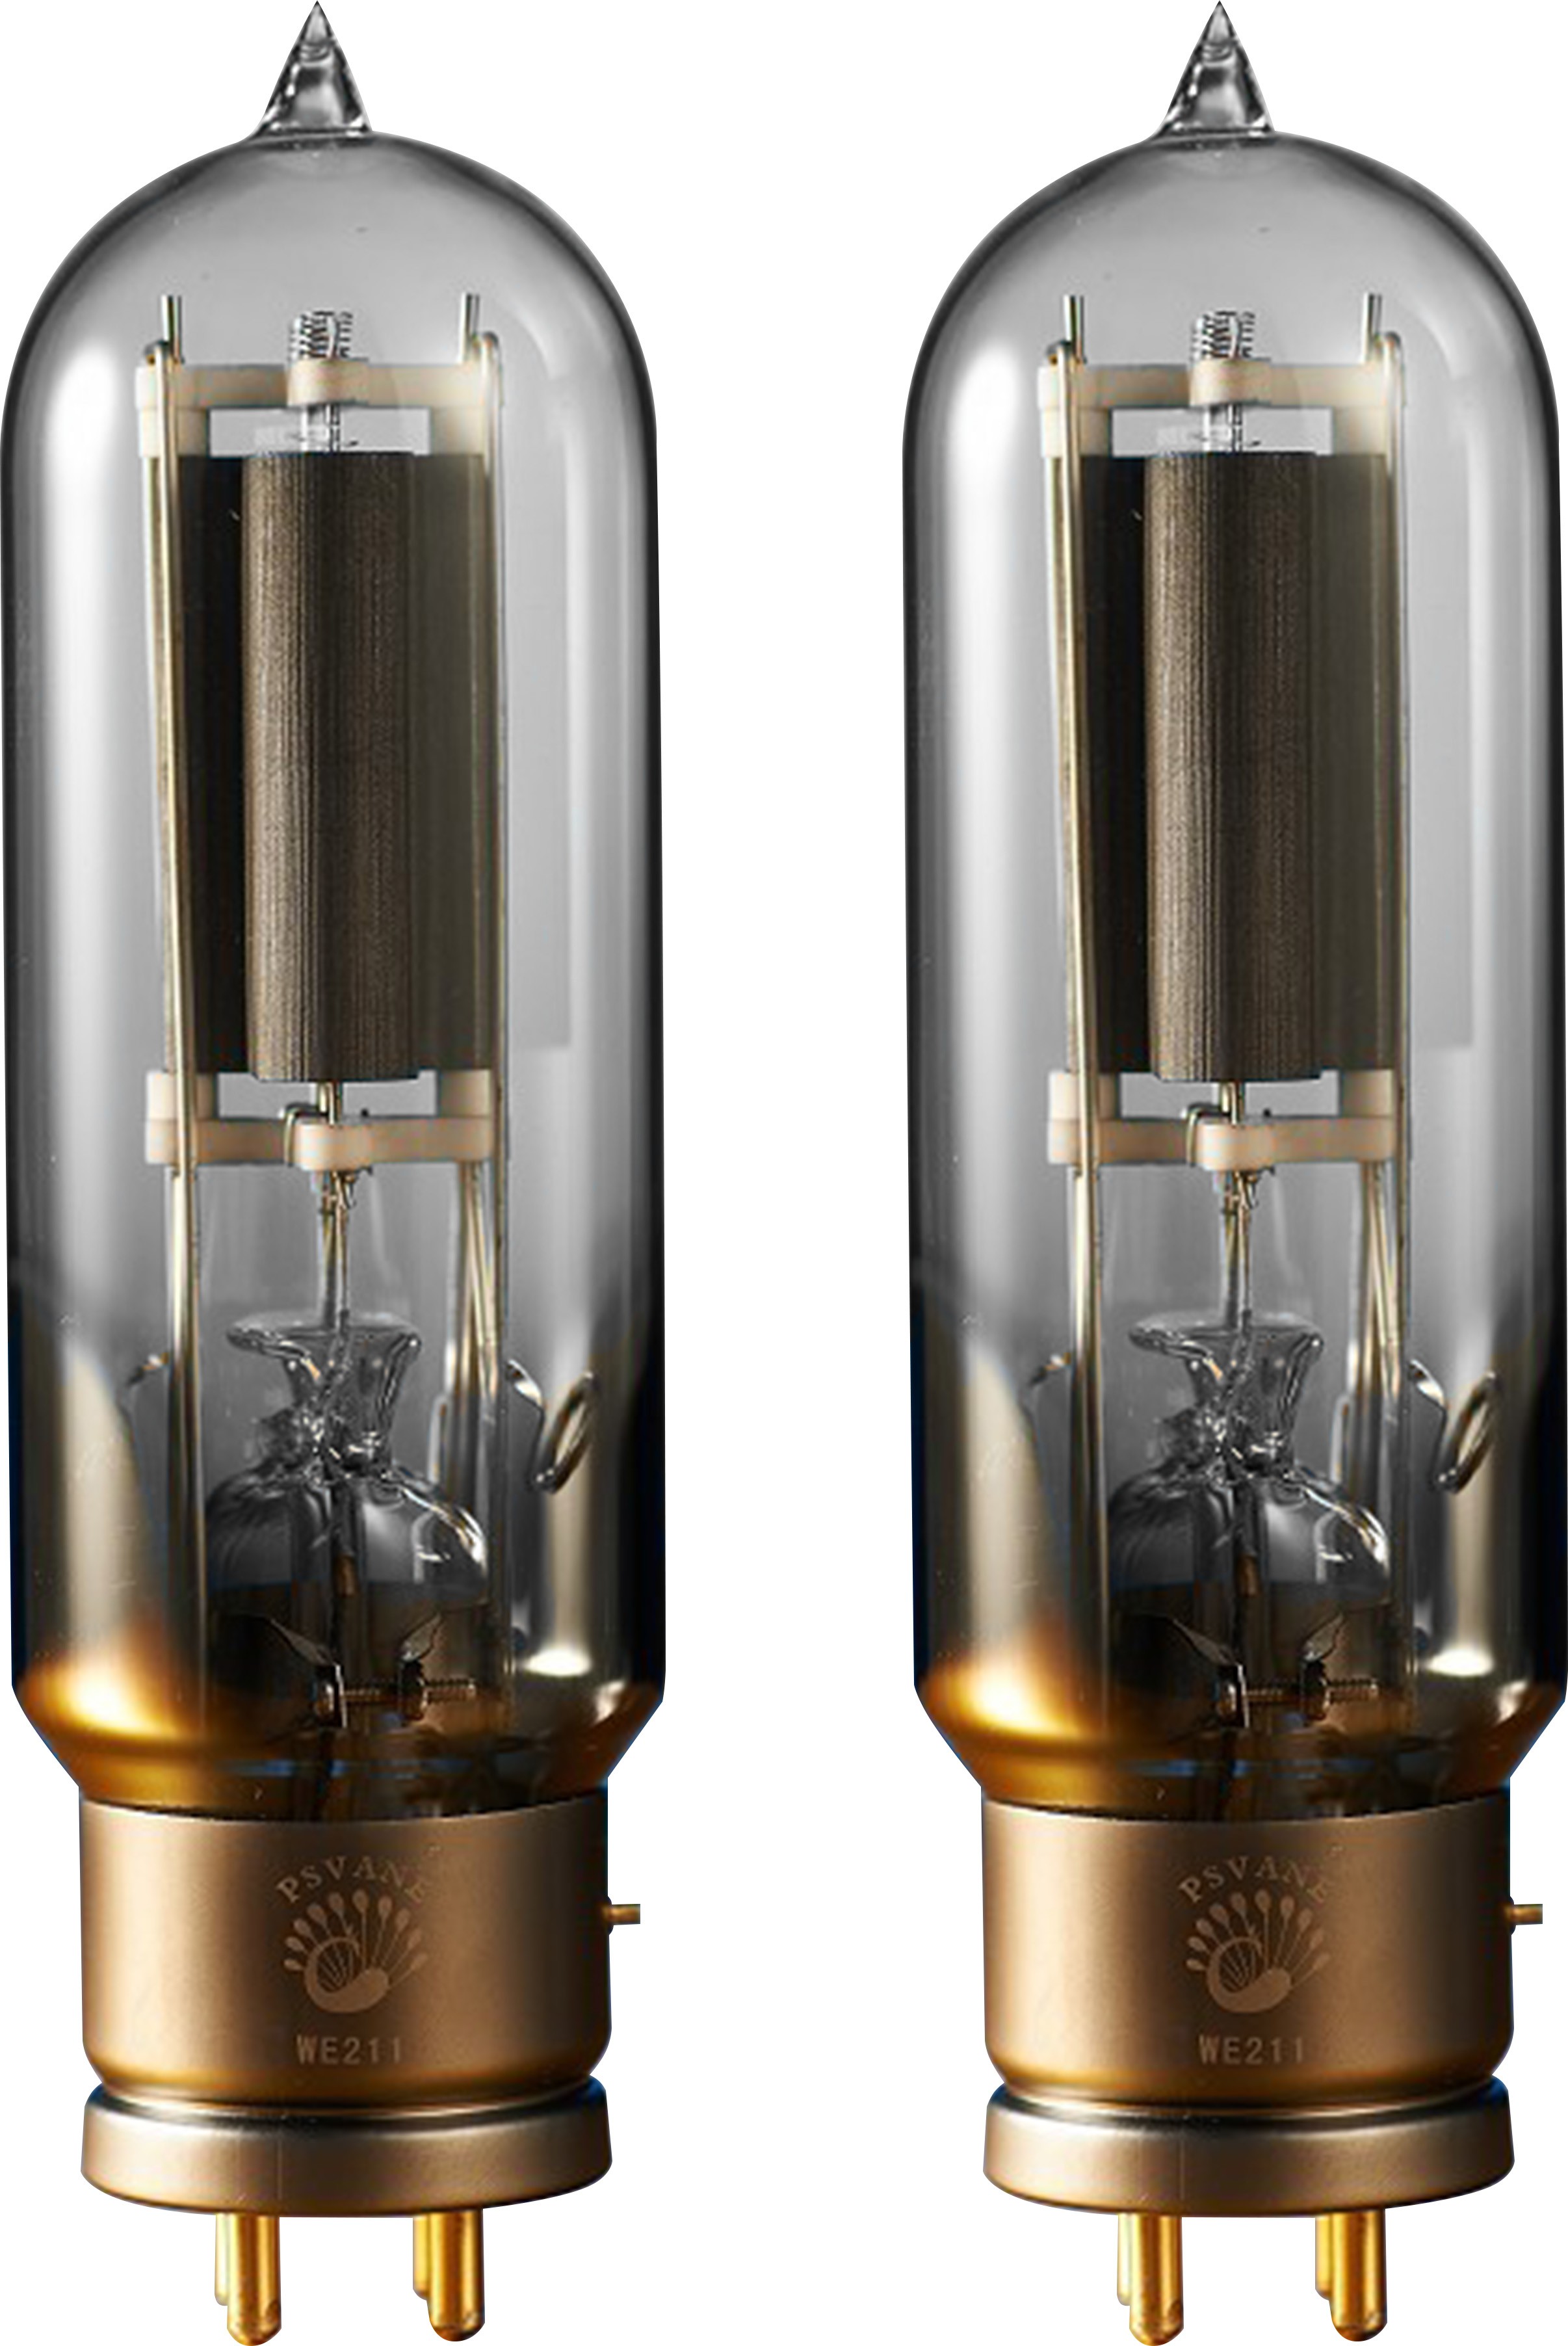 PSVANE WE211 LEGEND SERIES Triode Power Tubes (Matched Pair)